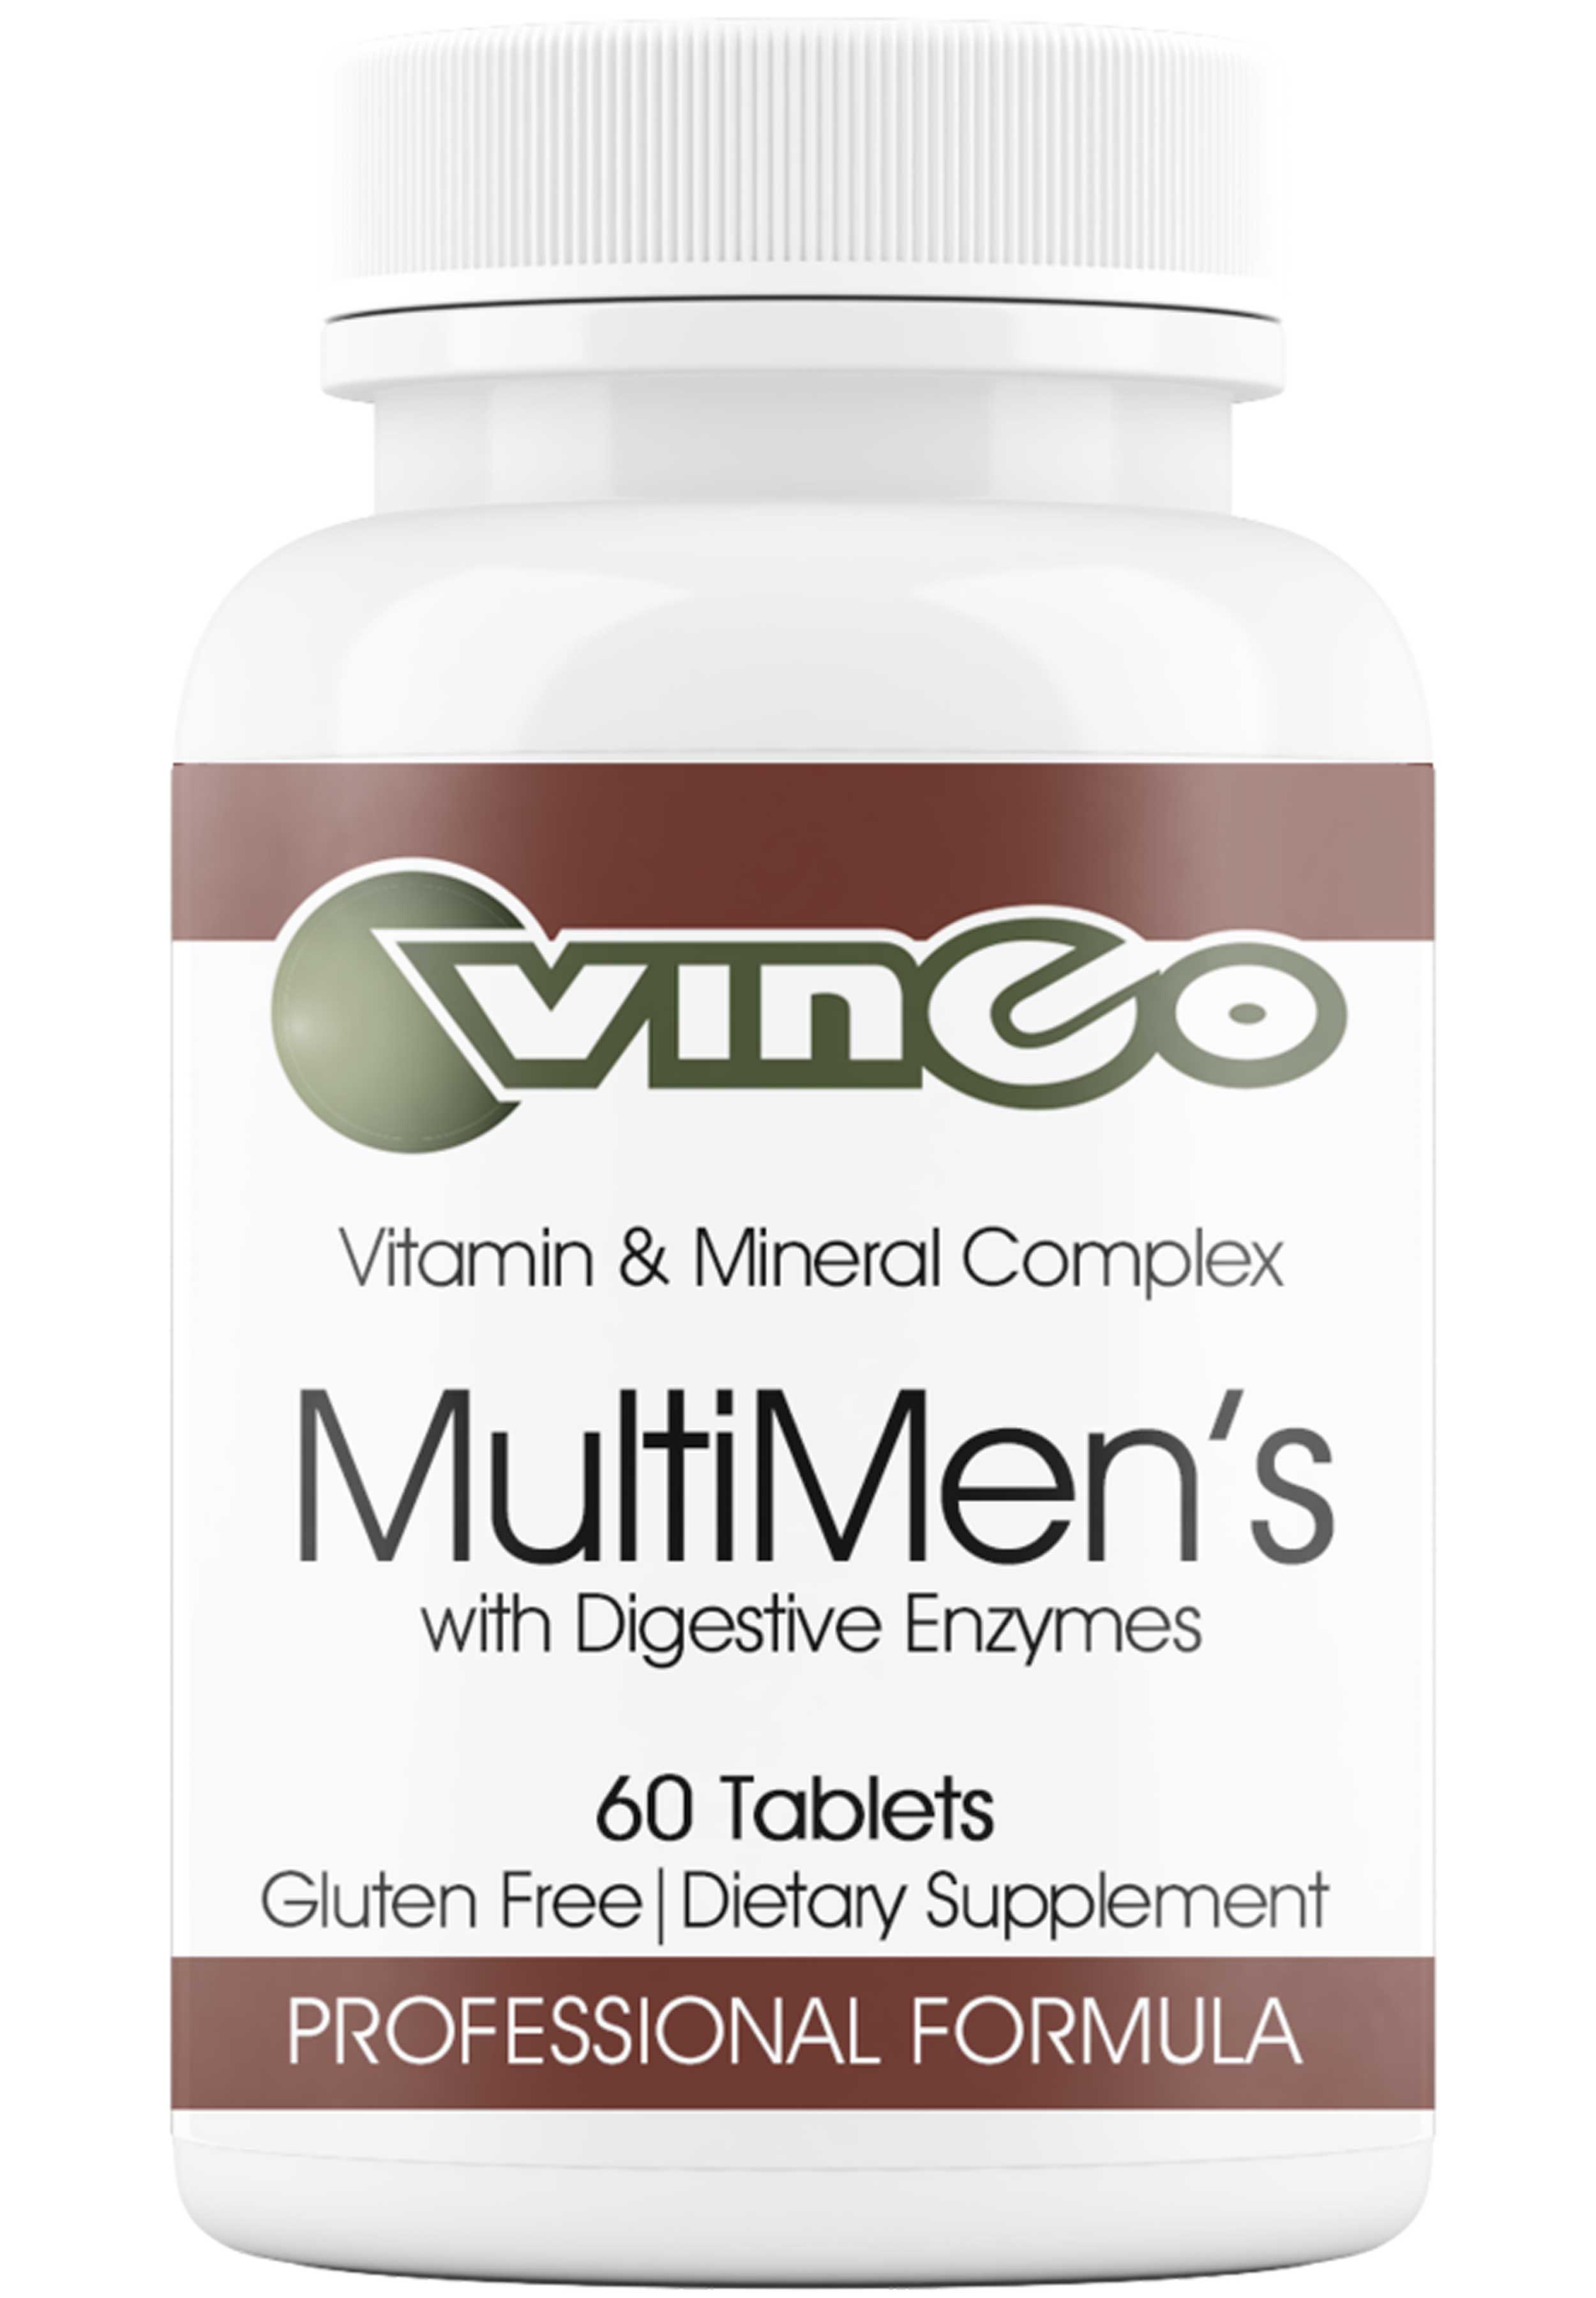 Vinco MultiMen's with Digestive Enzymes